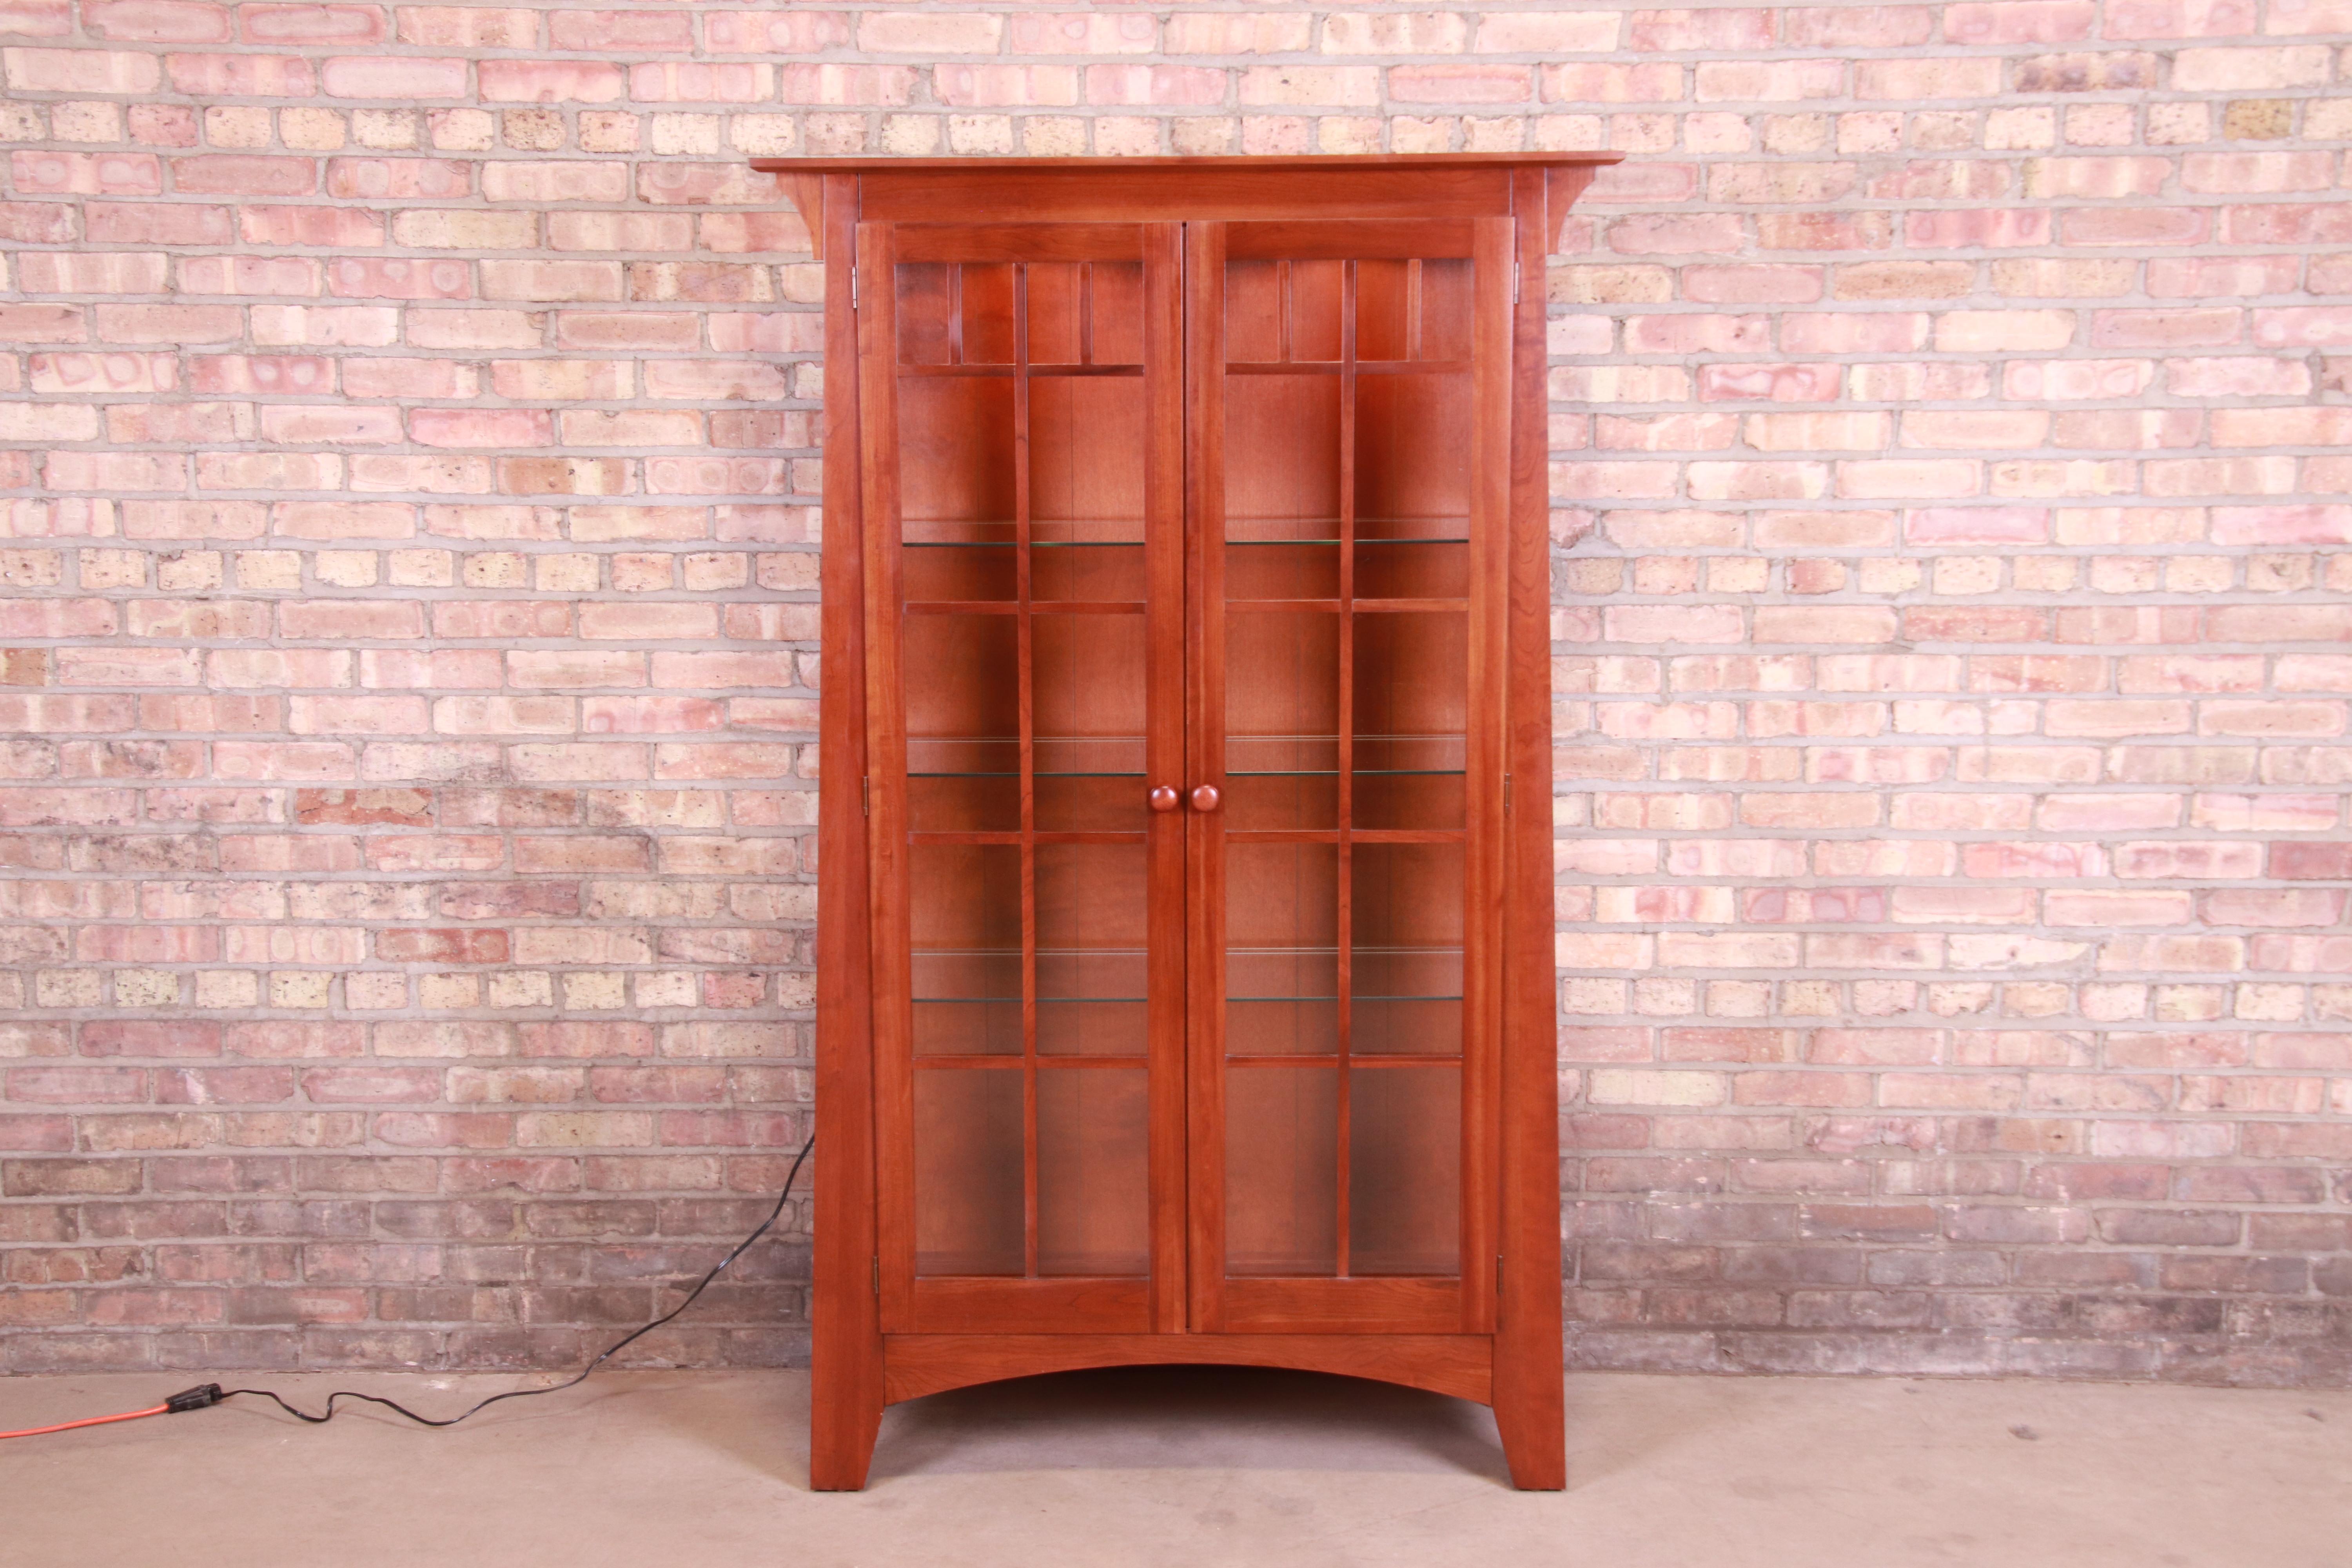 Ethan Allen Arts & Crafts Solid Cherry Wood Lighted Bookcase or Display Cabinet 1